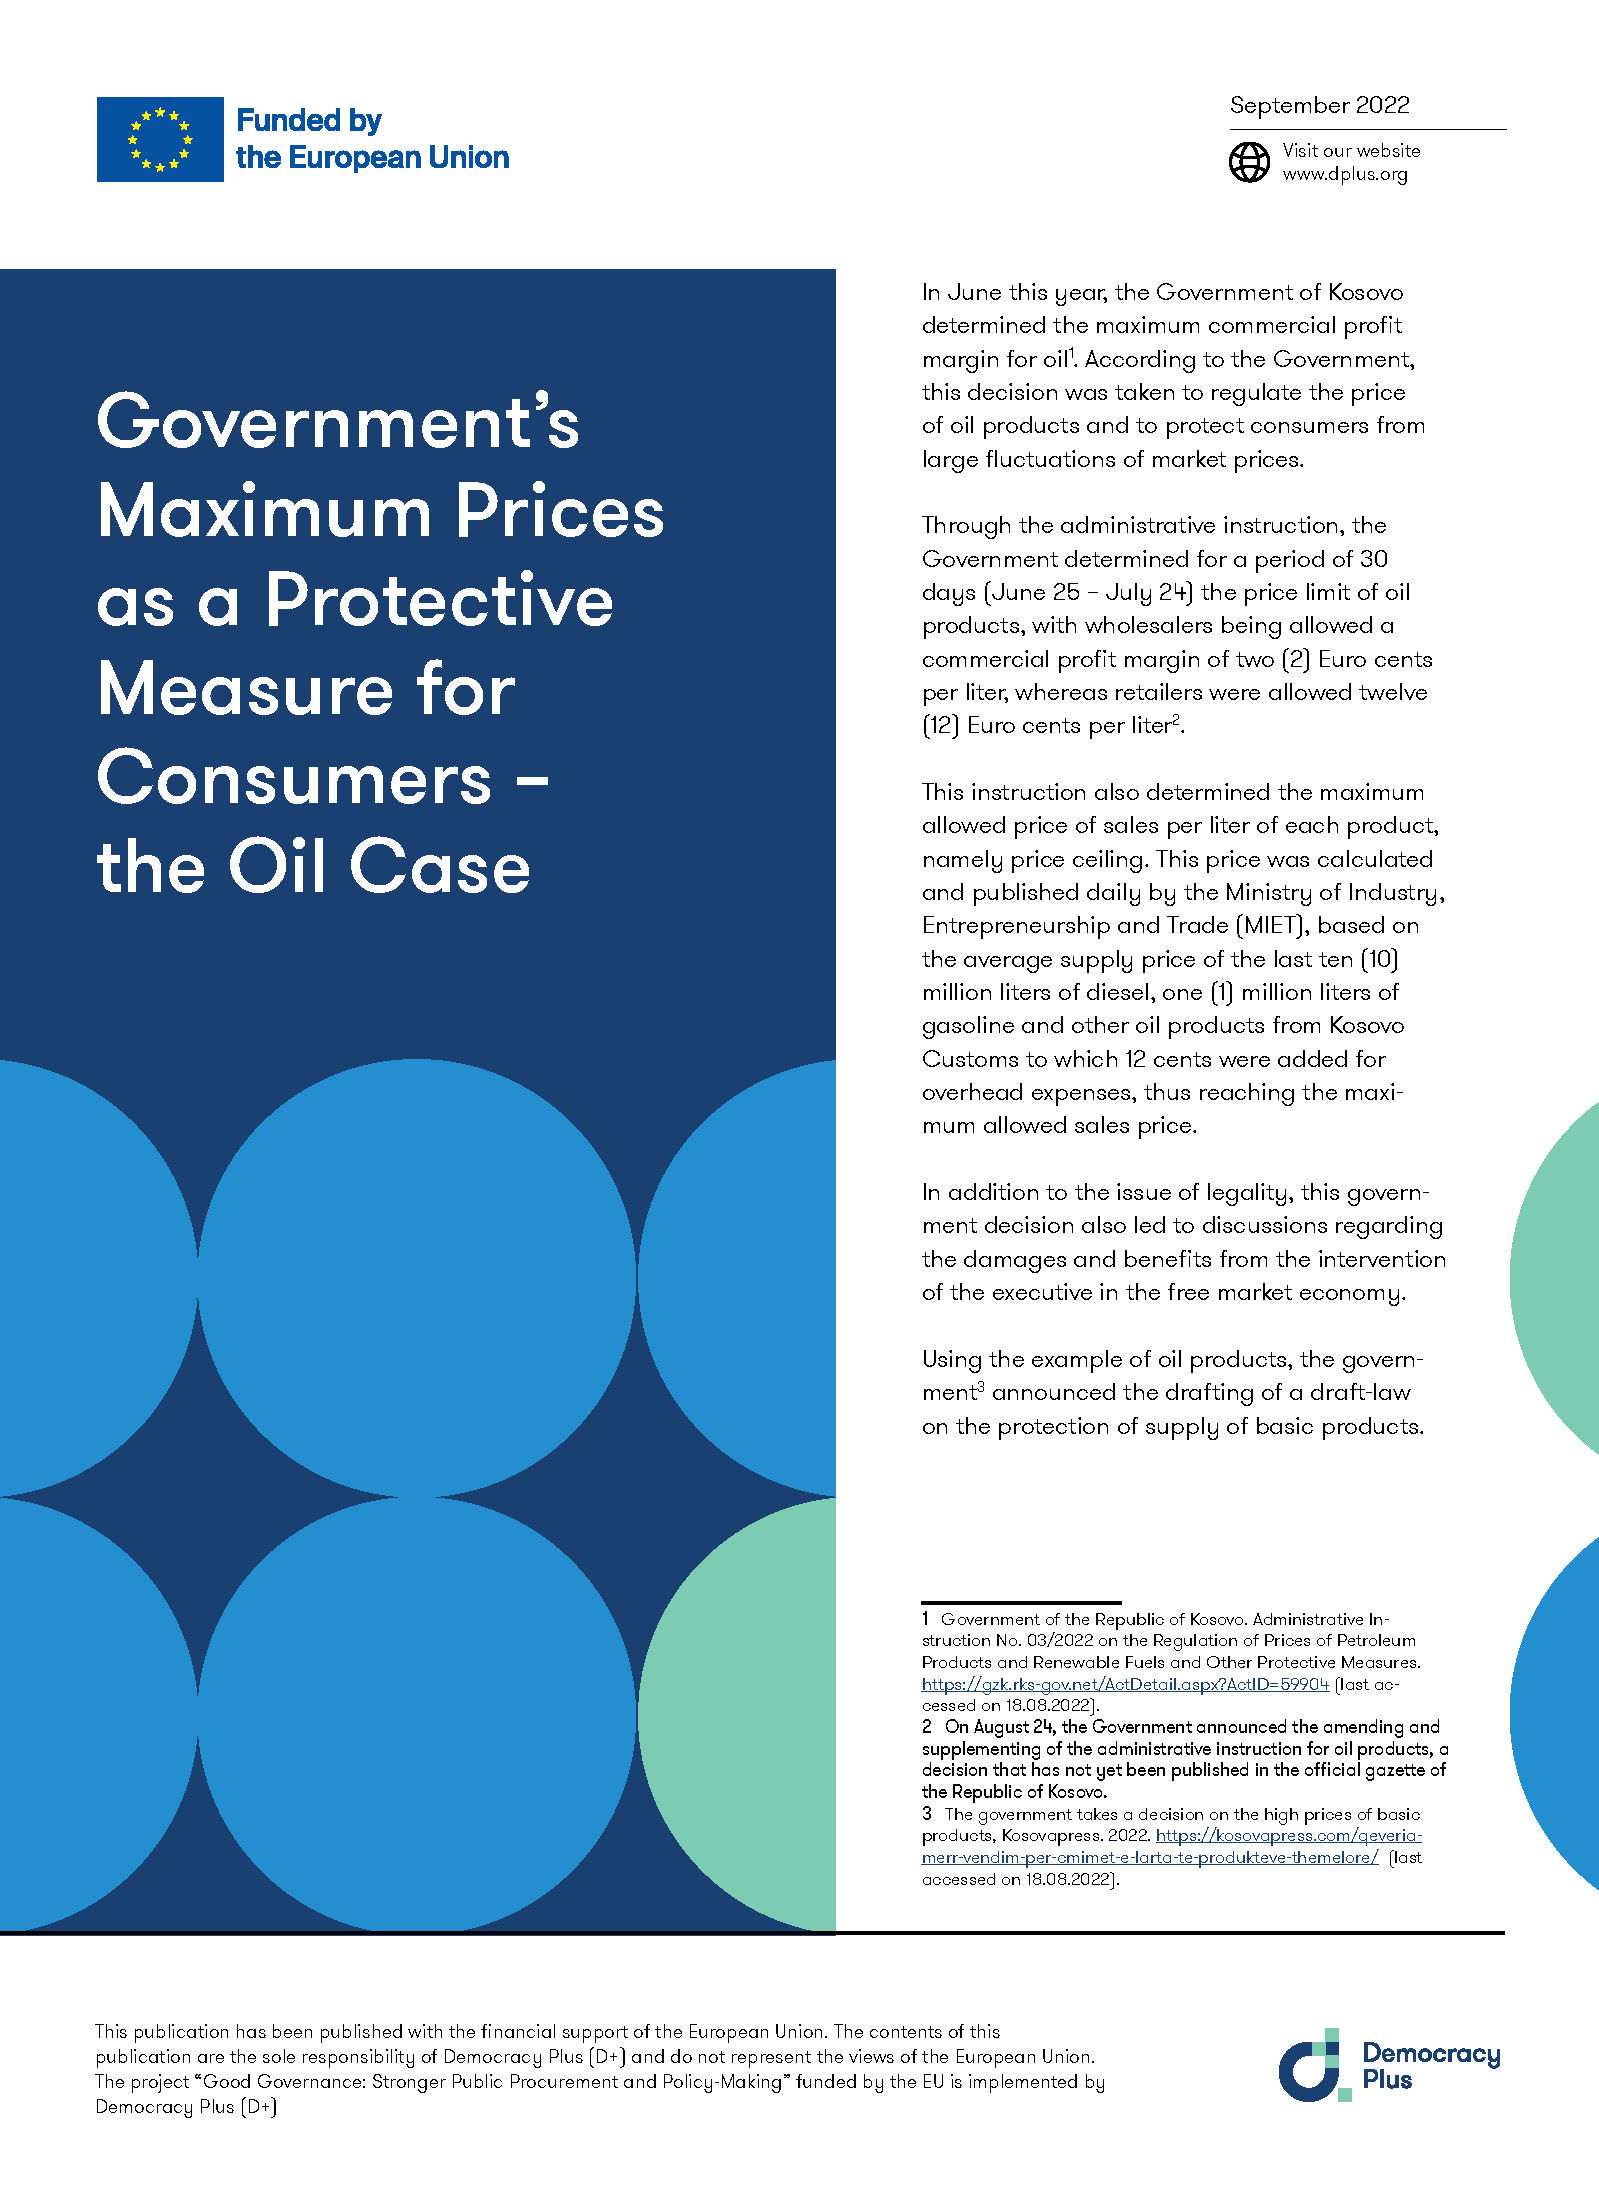 Government’s Maximum Prices as a Protective Measure for Consumers – the Oil Case